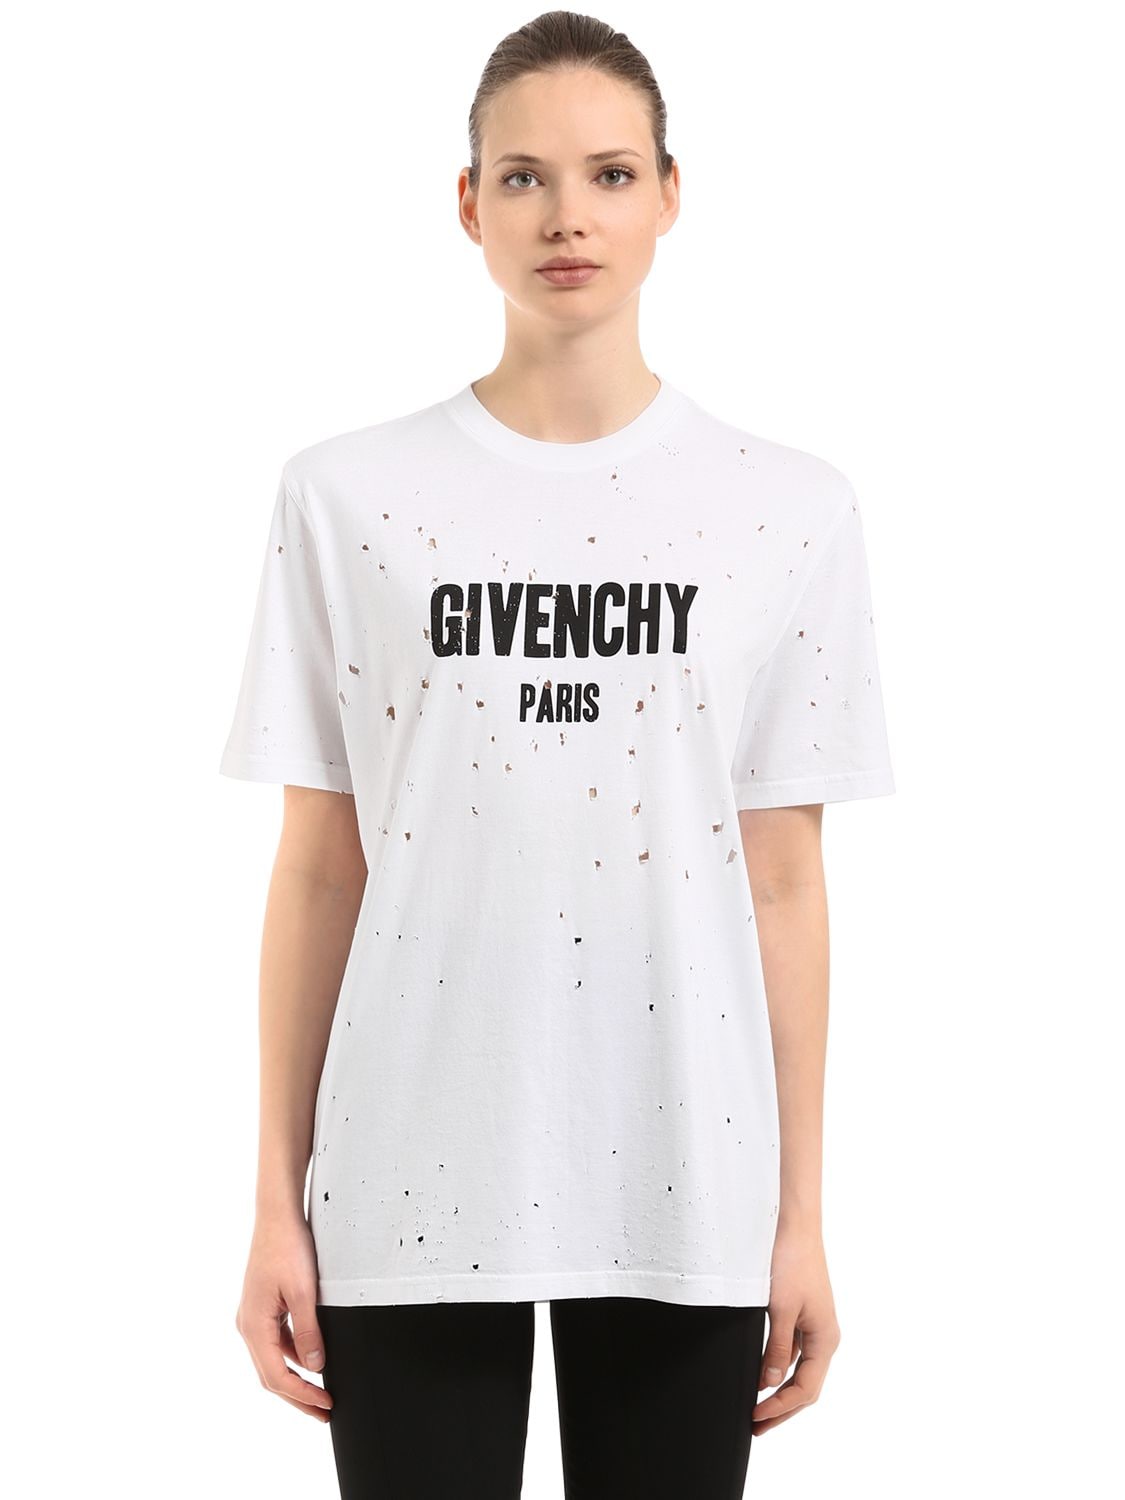 GIVENCHY LOGO PRINTED DESTROYED JERSEY T-SHIRT,67IA7M044-MTAw0